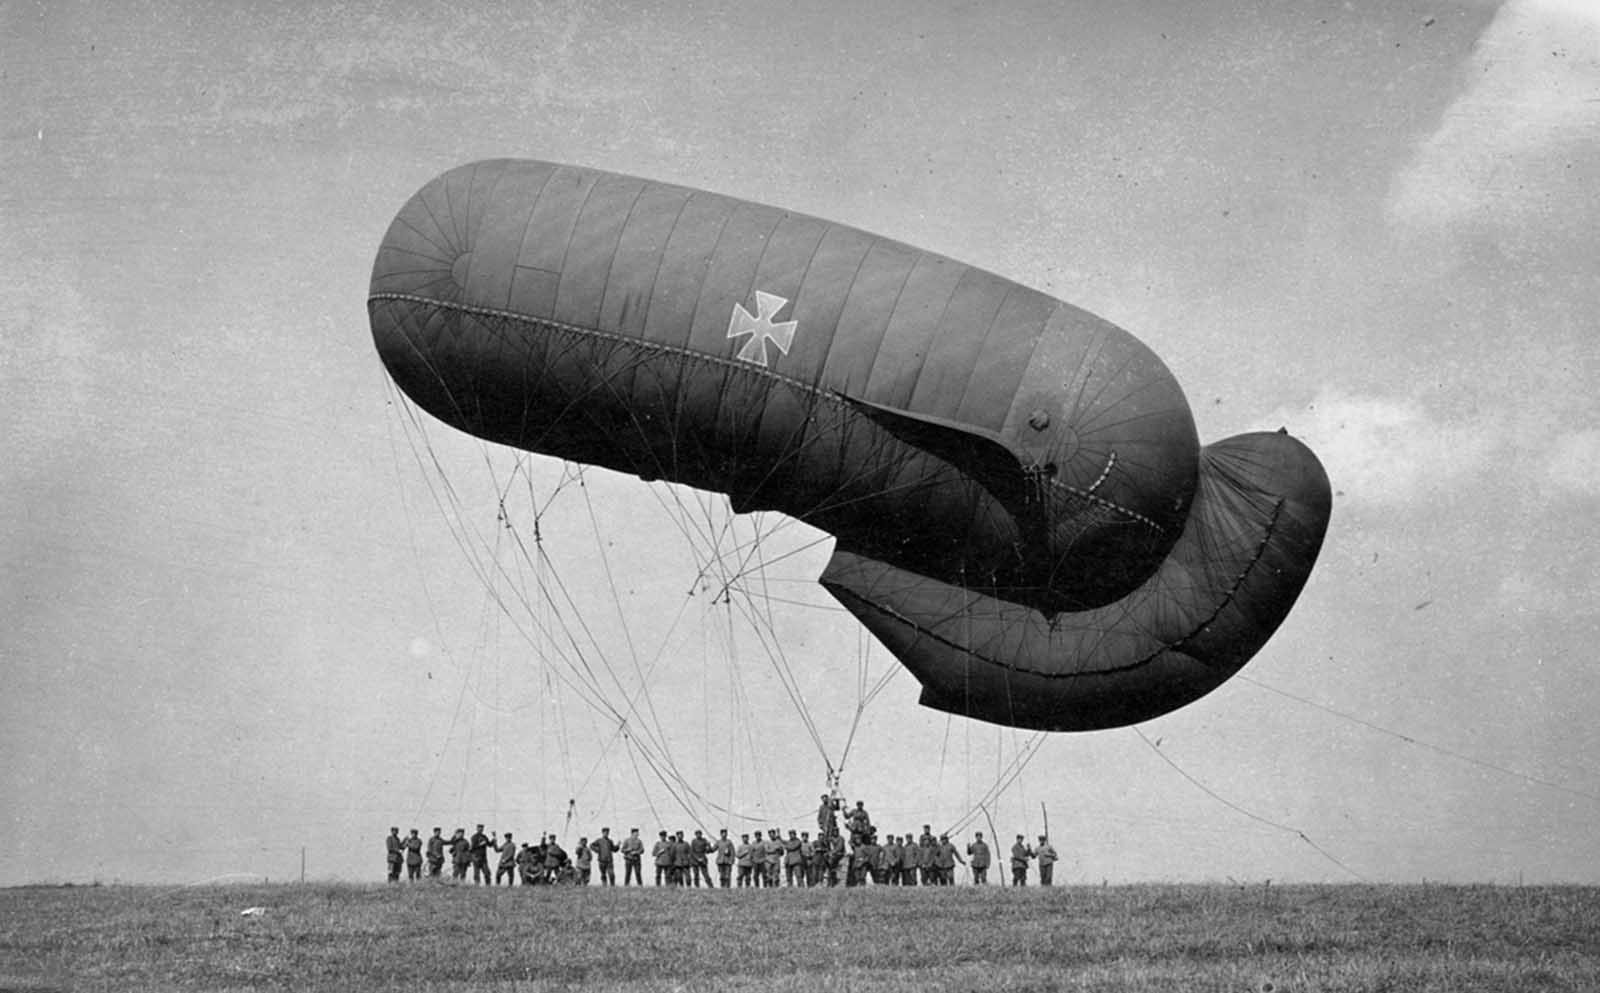 German captive balloon at Equancourt, France, on September 22, 1916. Observation balloons were used by both sides to gain an advantage of height across relatively flat terrain. Observers were lifted in a small gondola suspended below the hydrogen-filled balloons. Hundreds were shot down during the course of the war.